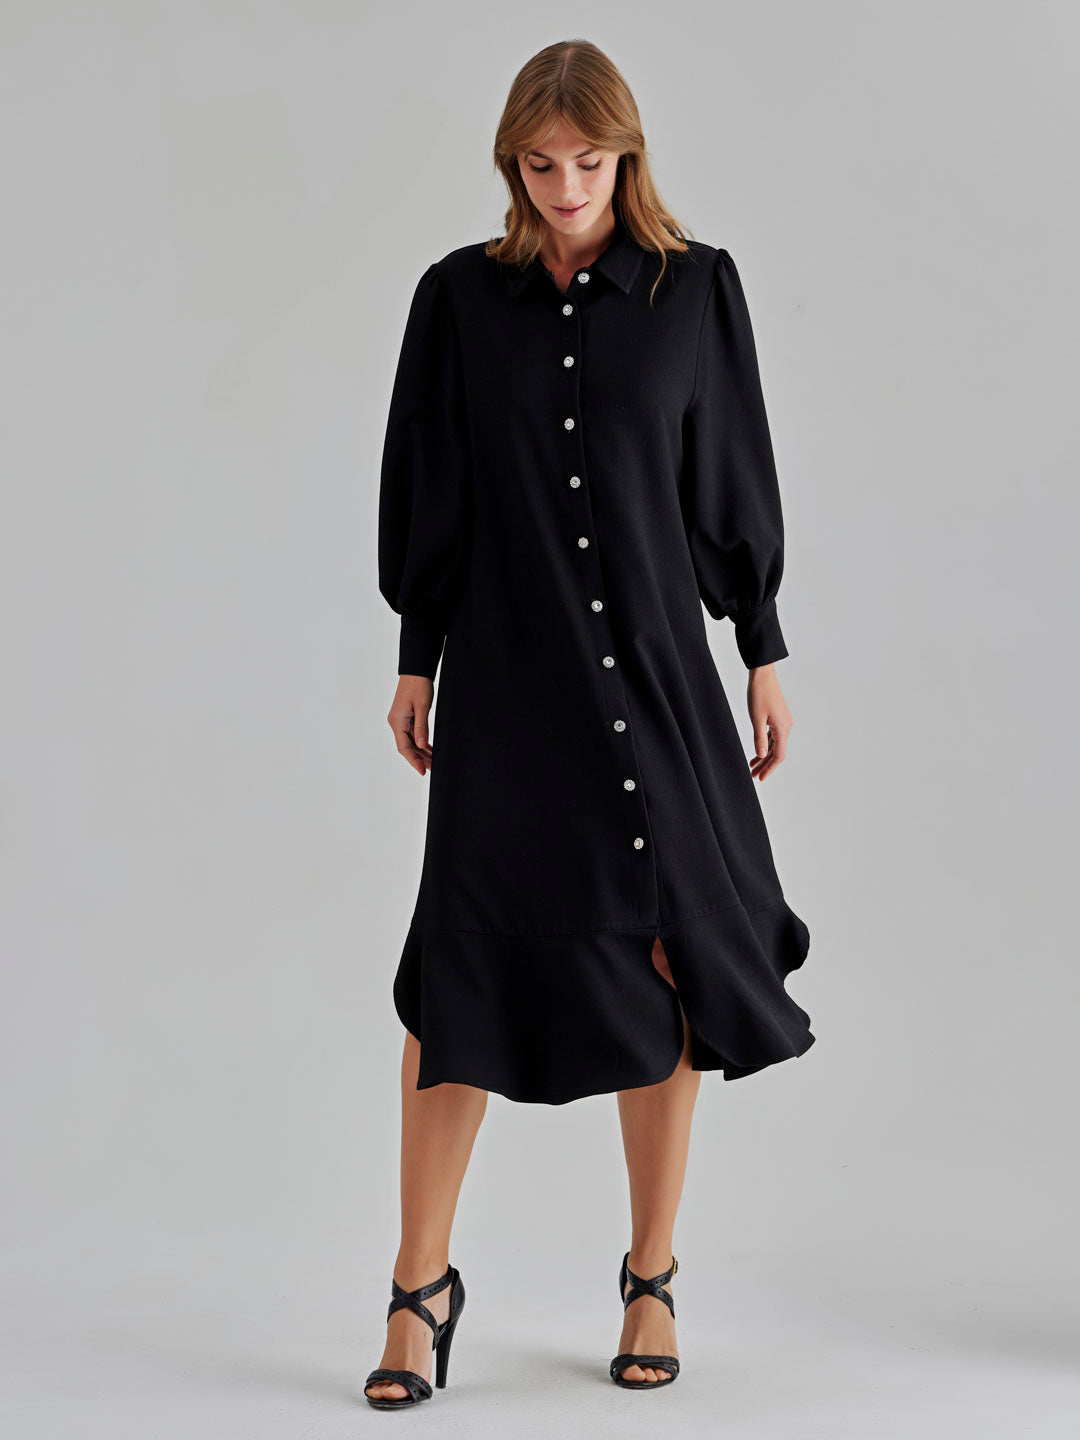 Isola Pearl Buttoned Dress Black